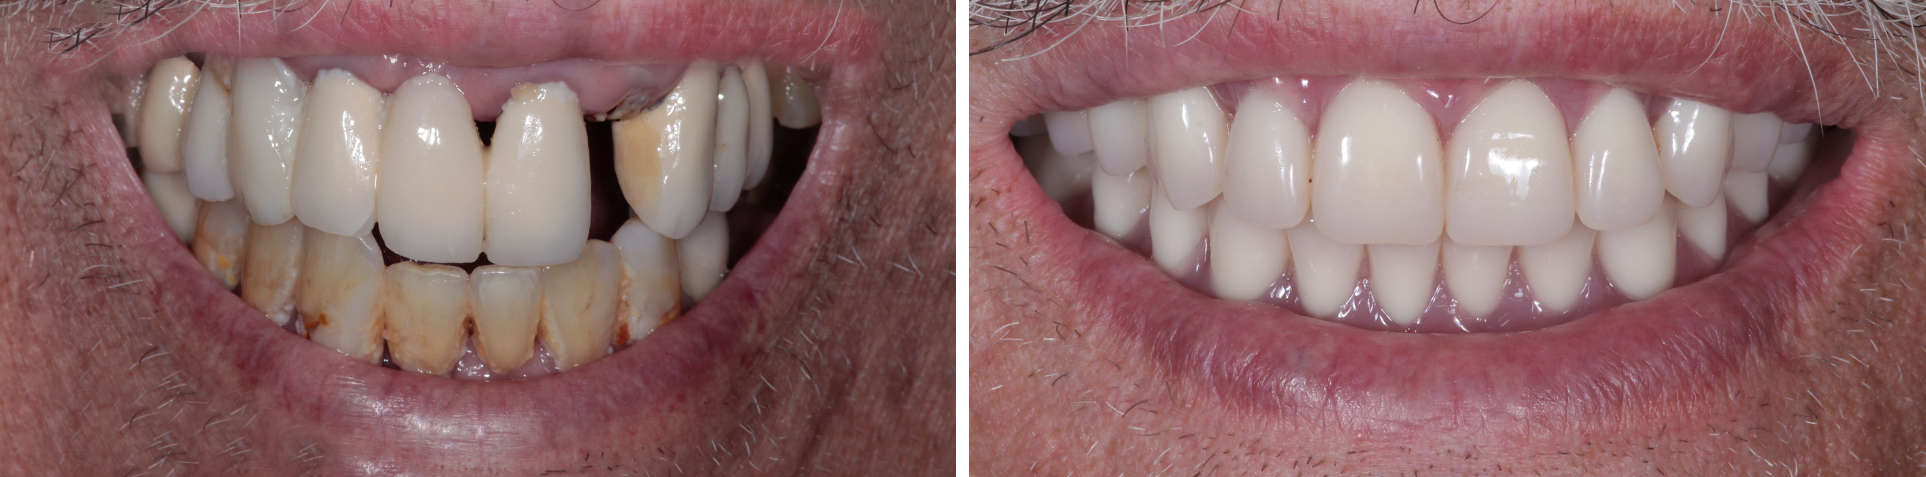 Photo of Cosmetic Gum Depigmentation by Beverly Hills Periodontist Dr. Aalam and Dr. Krivitsky